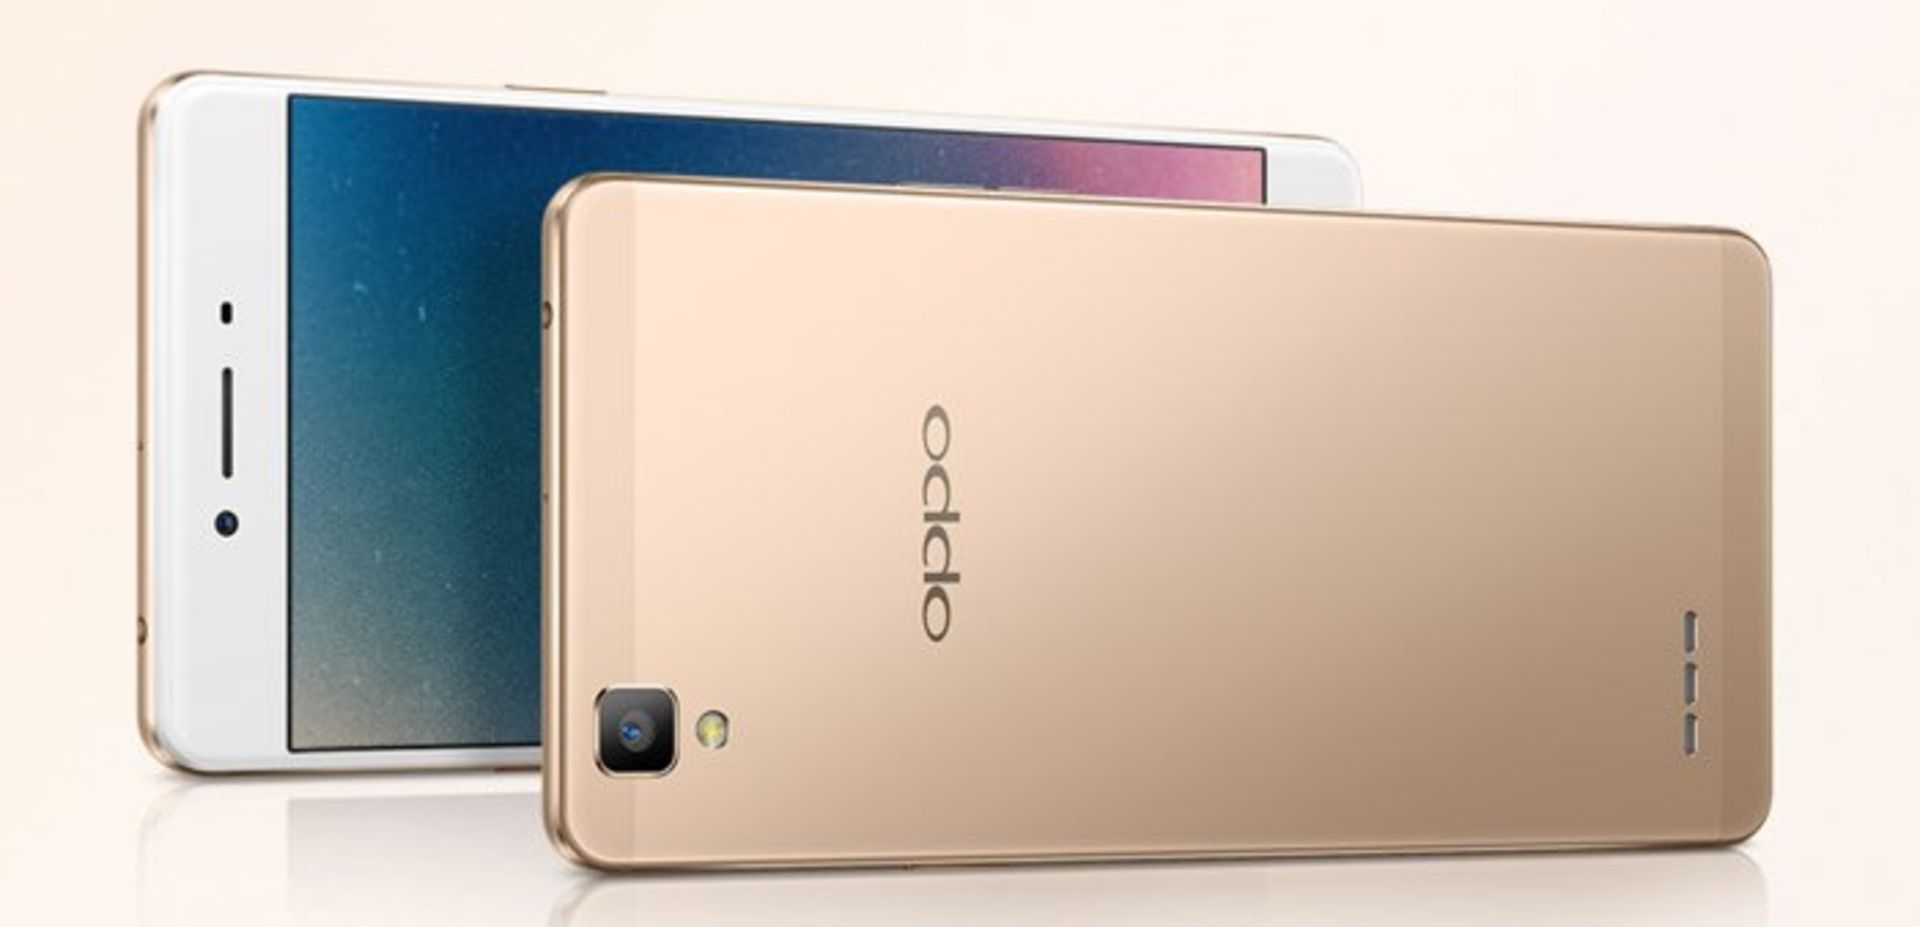 the oppo a53 is now officia2l 7e934